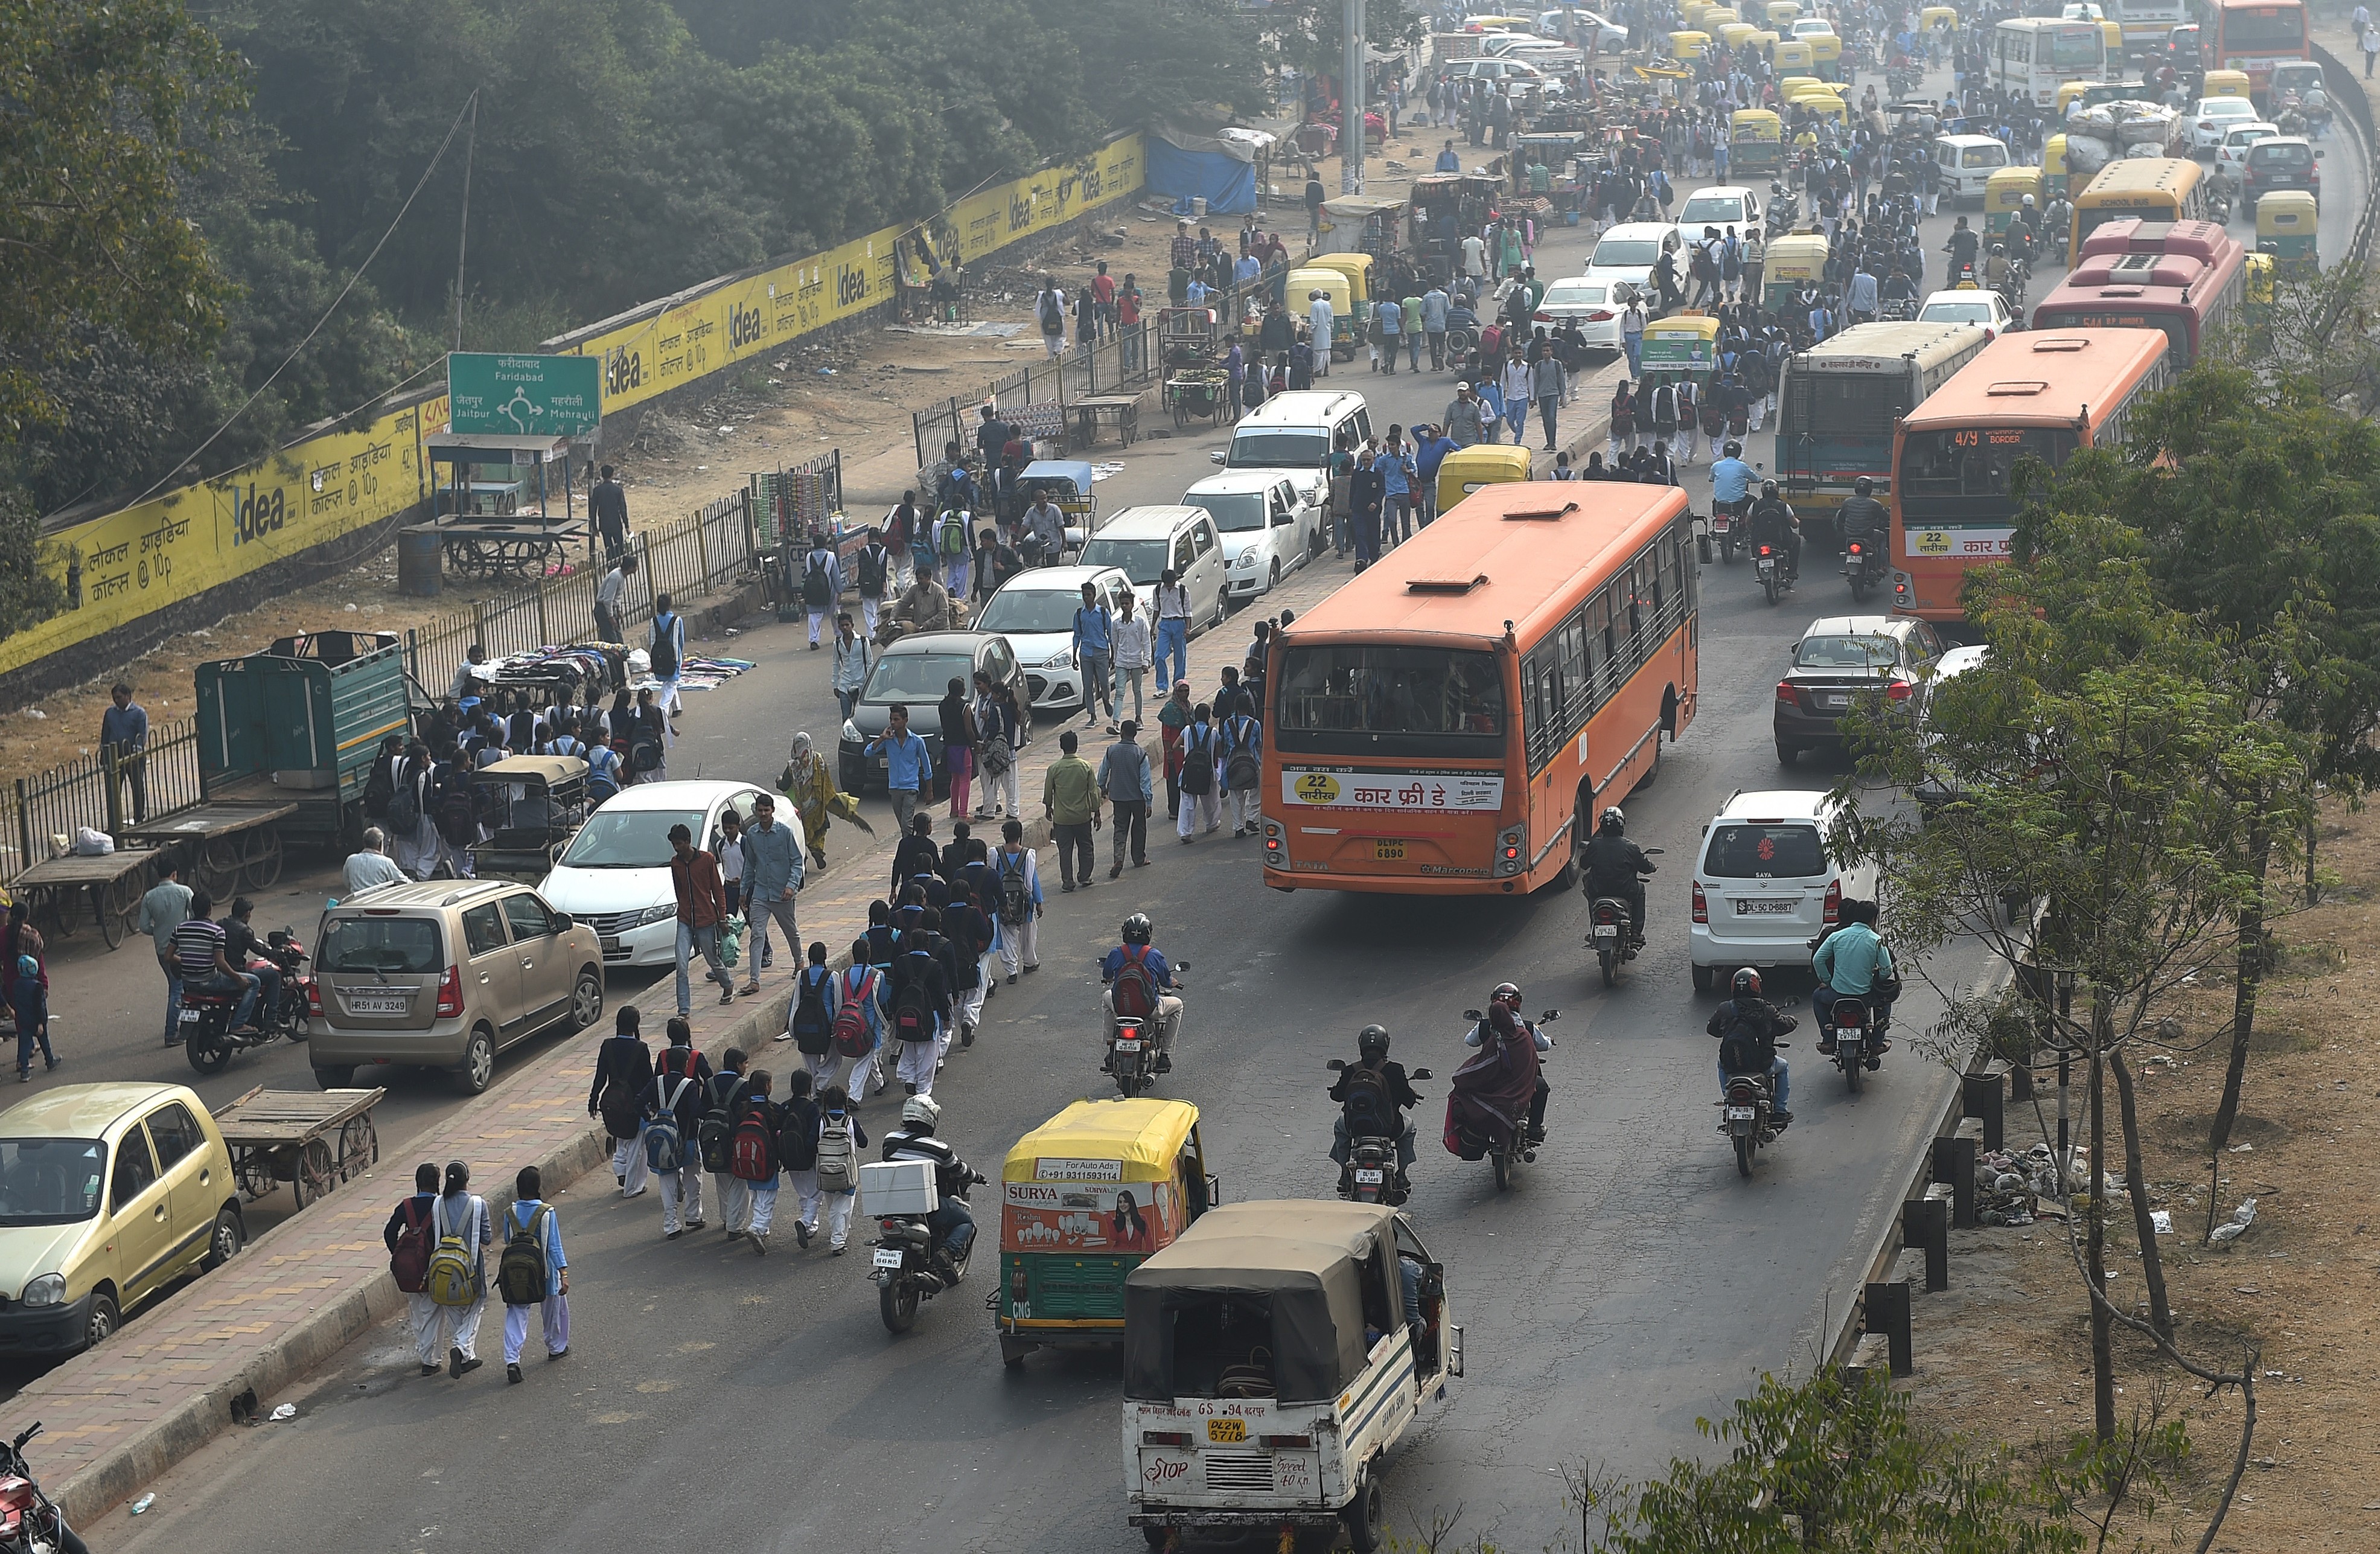 Heavy traffic is seen during a smoggy day in New Delhi on Nov. 30, 2015 (Money Sharma—AFP/Getty Images)